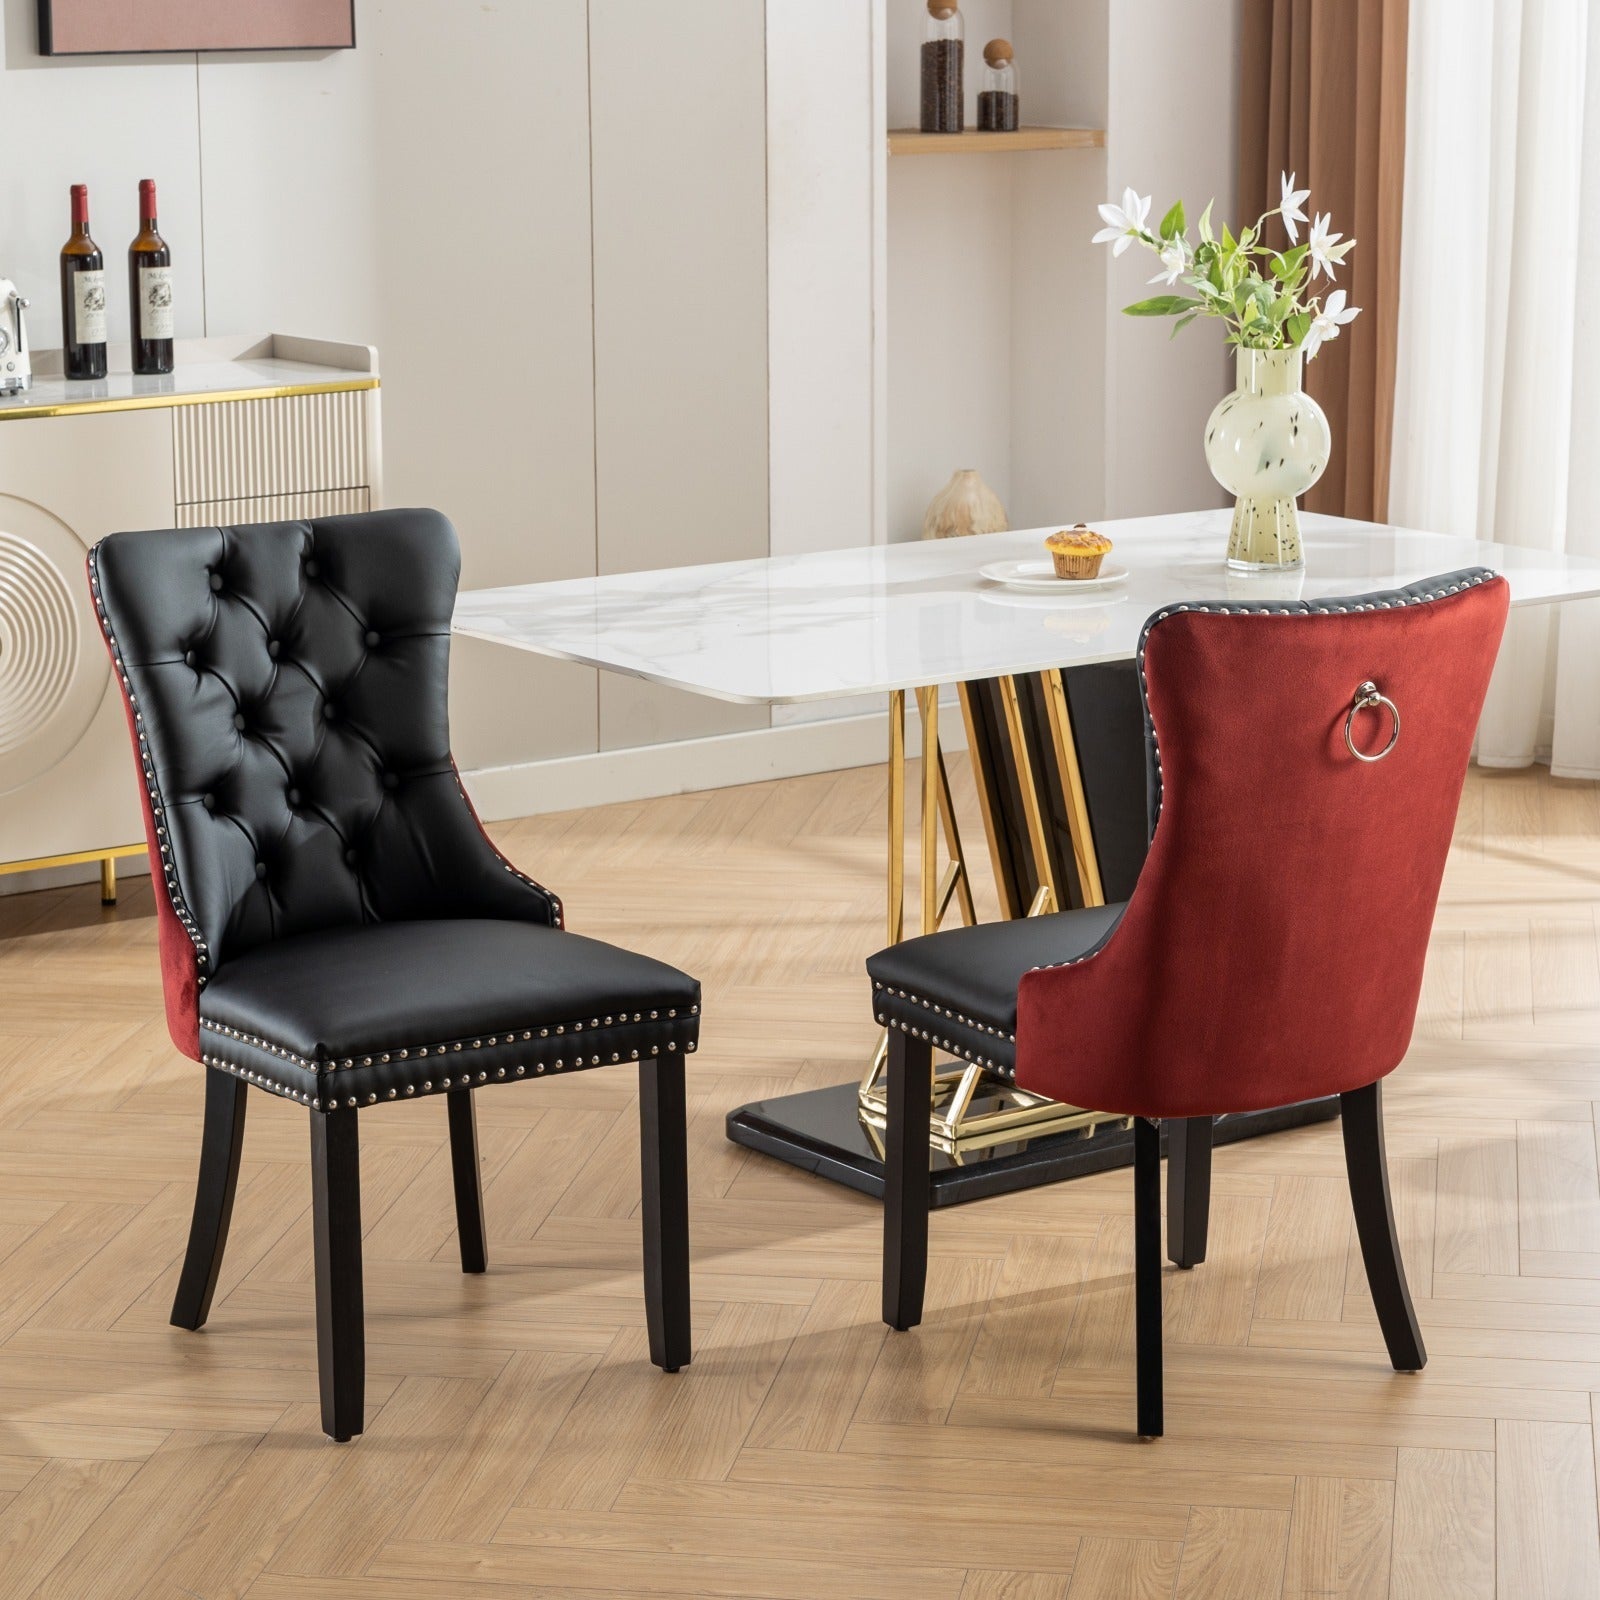 🆓🚛 High-End Tufted Solid Wood Contemporary Pu and Velvet Upholstered Dining Chair With Wood Legs Nailhead Trim 2-Pcs Set, Black & Wine Red